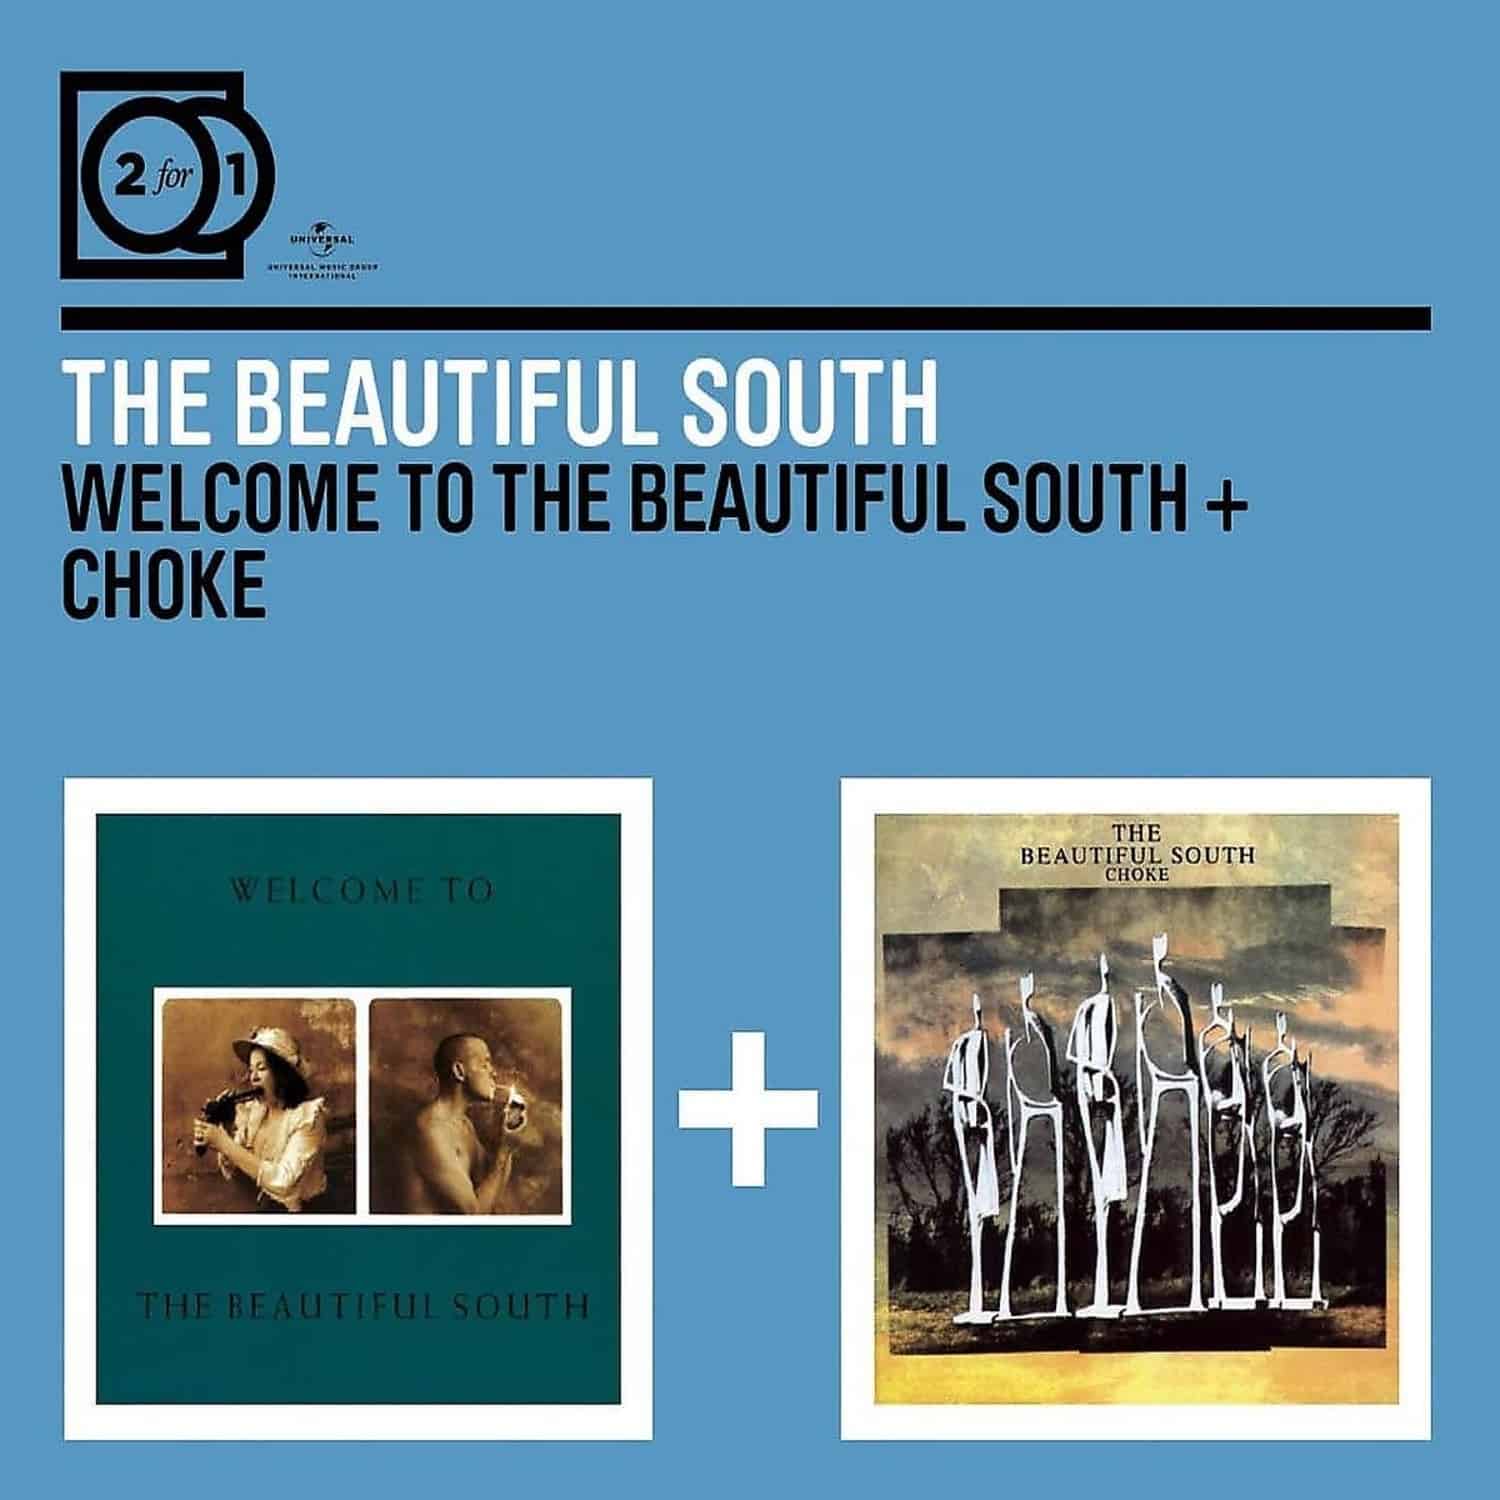 The Beautiful South - WELCOME TO THE BEAUTIFUL SOUTH 